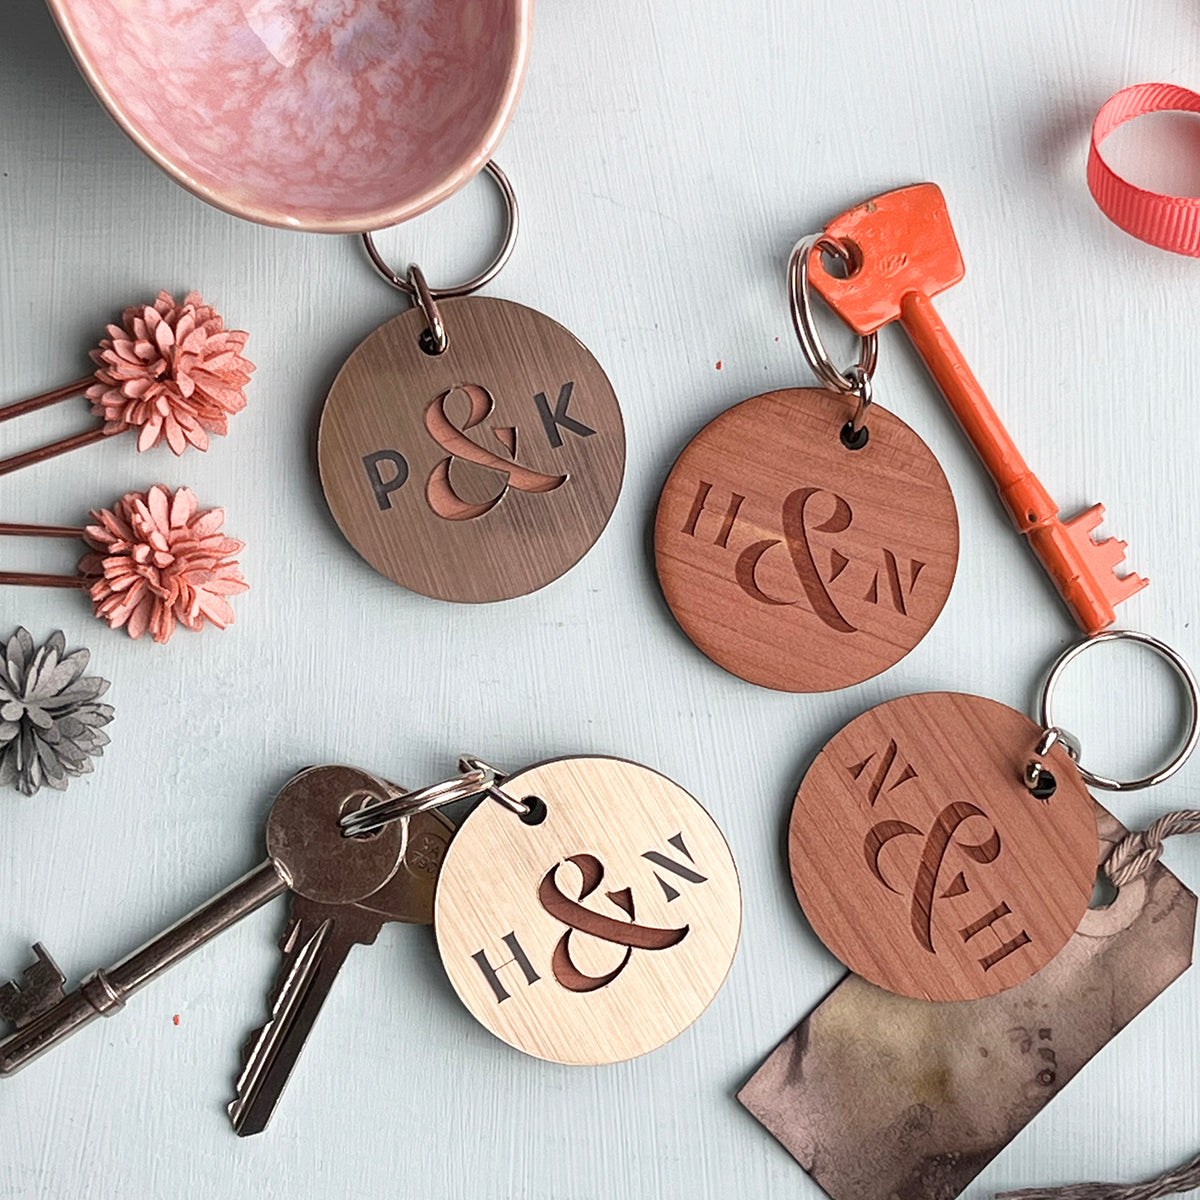 Selection of wooden and metallic circular keyrings engraved with initials and an ampersand